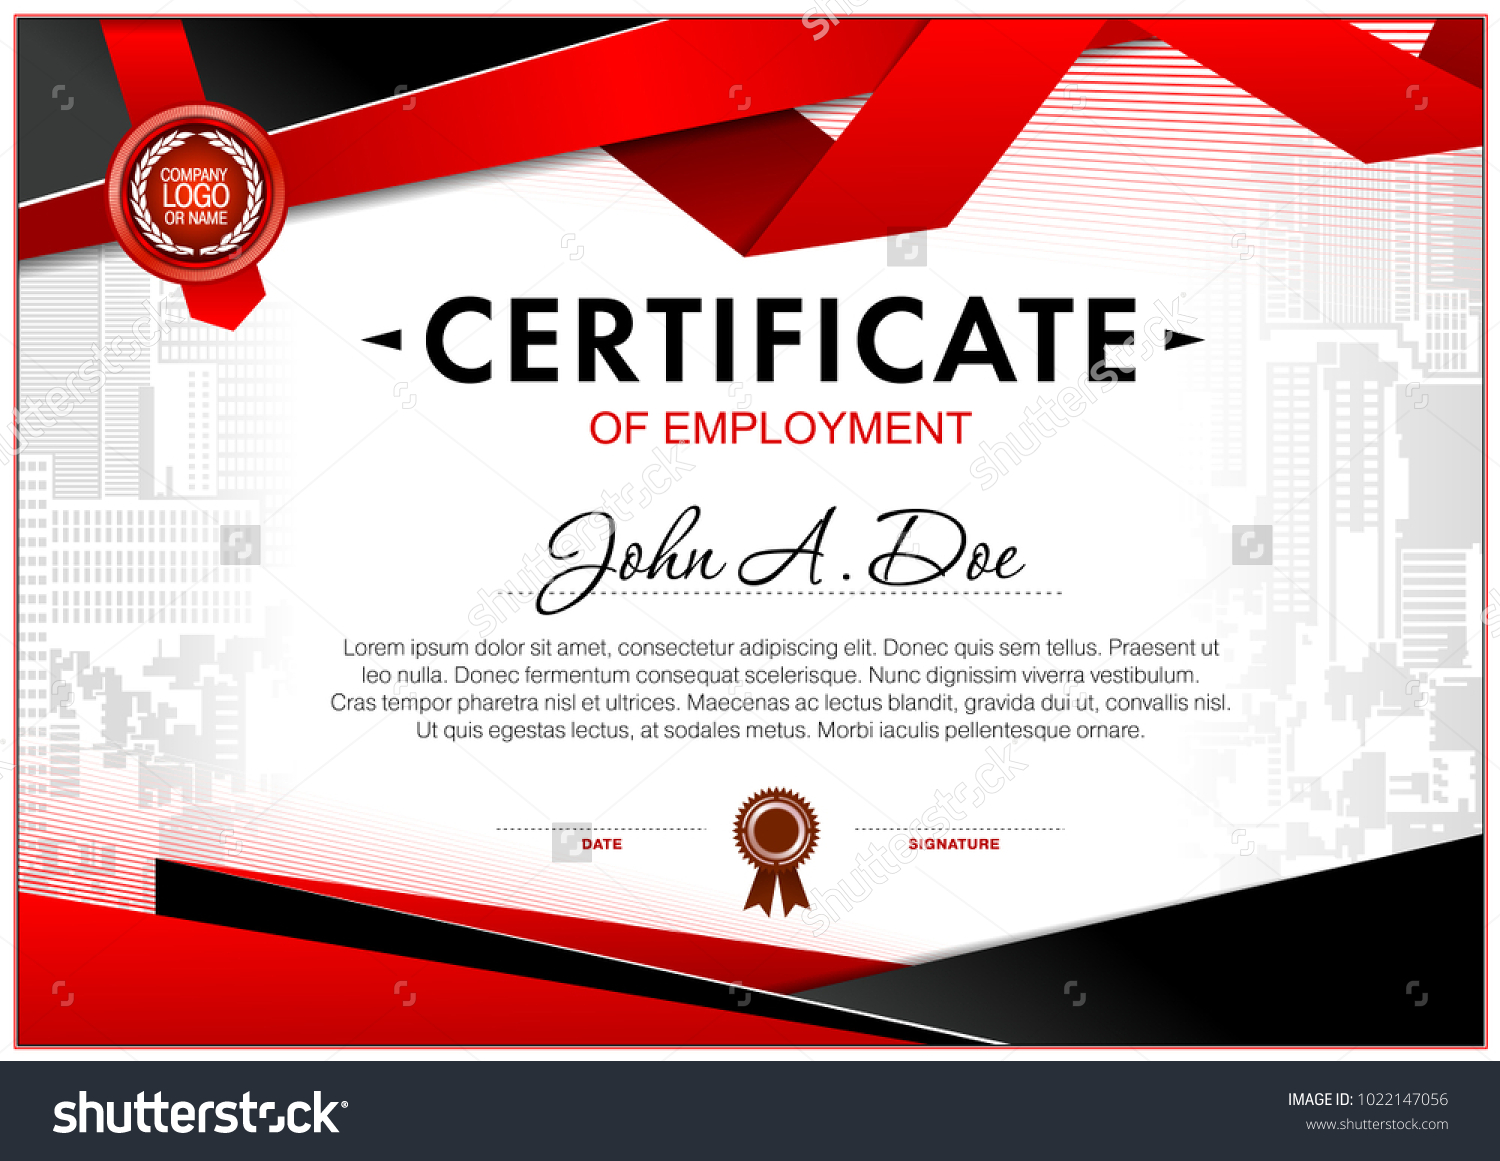 Certificate Employment Template Geometrical Simple Shapes Stock Regarding Certificate Of Employment Template